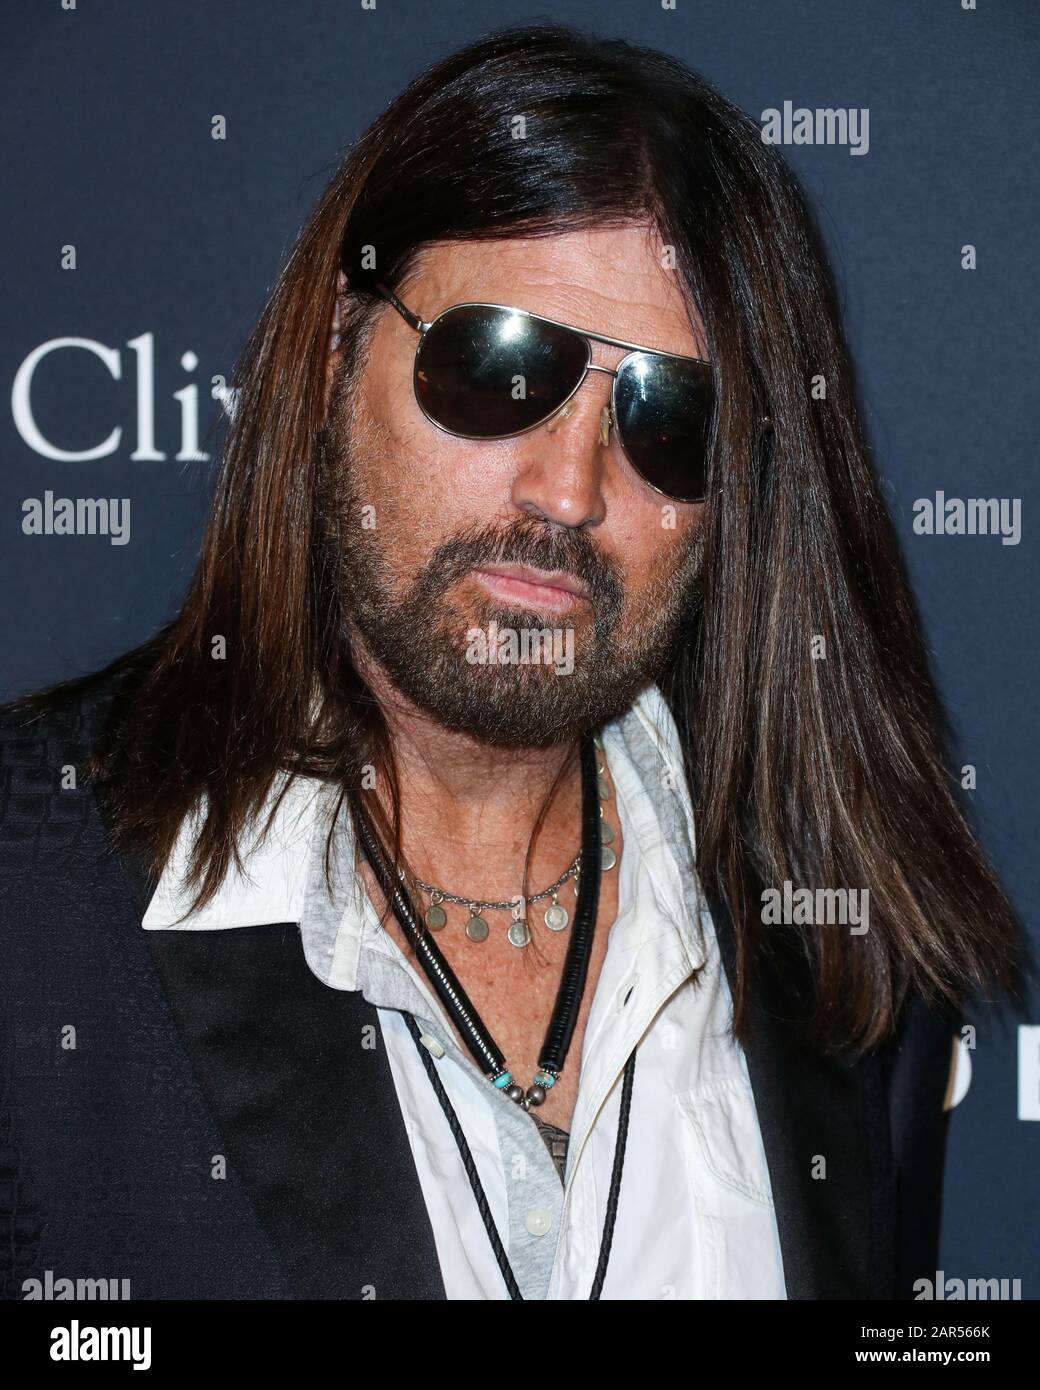 BEVERLY HILLS, LOS ANGELES, CALIFORNIA, USA - JANUARY 25: Billy Ray Cyrus arrives at The Recording Academy And Clive Davis' 2020 Pre-GRAMMY Gala held at The Beverly Hilton Hotel on January 25, 2020 in Beverly Hills, Los Angeles, California, United States. (Photo by Xavier Collin/Image Press Agency) Stock Photo